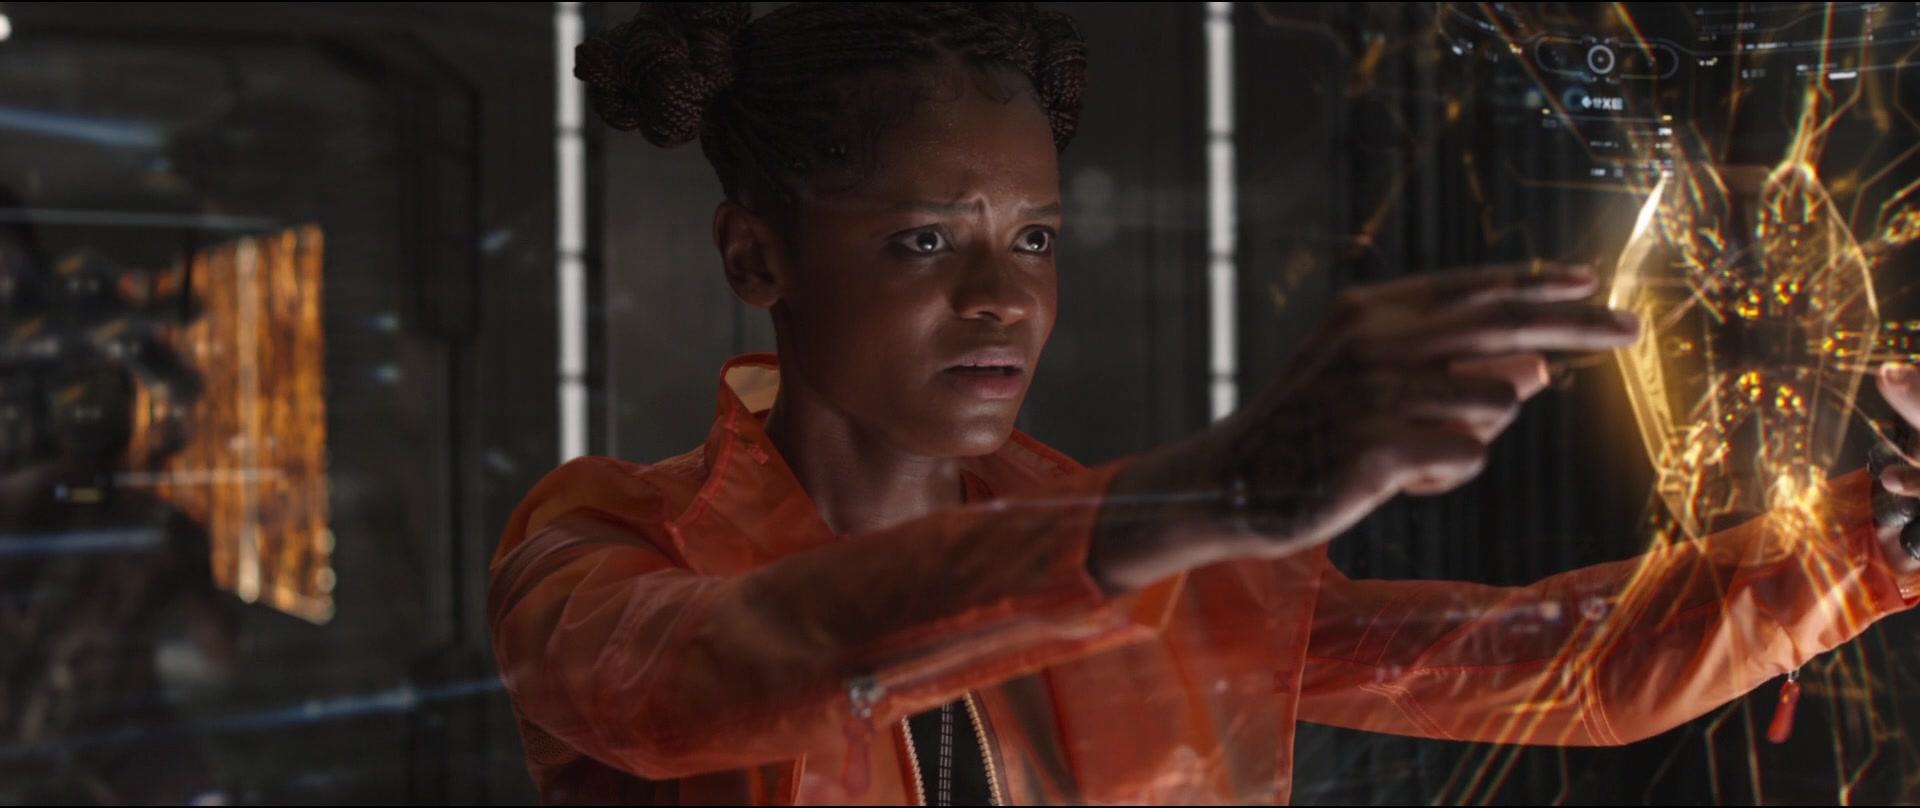 Shuri (Letitia Wright) attempts to surgically remove the Mind Stone from Vision's (Paul Bettany) forehead in Avengers: Infinity War (2018), Marvel Entertainment via Blu-ray